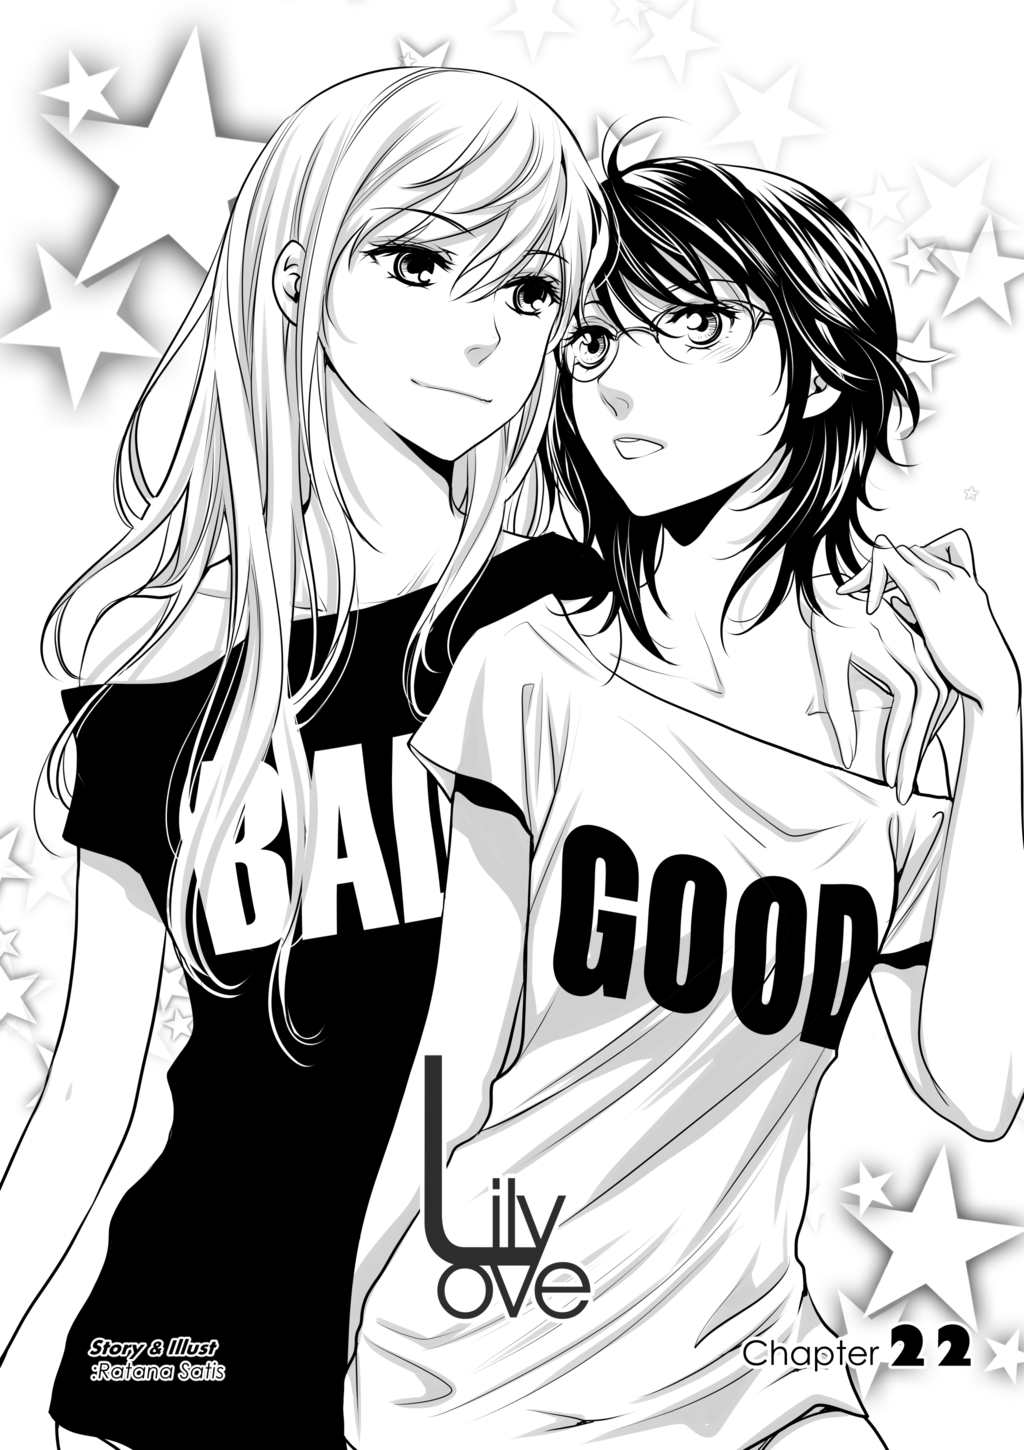   Lily Love Chapter 22 - RAWS are here :D (log in via FB to see or create account